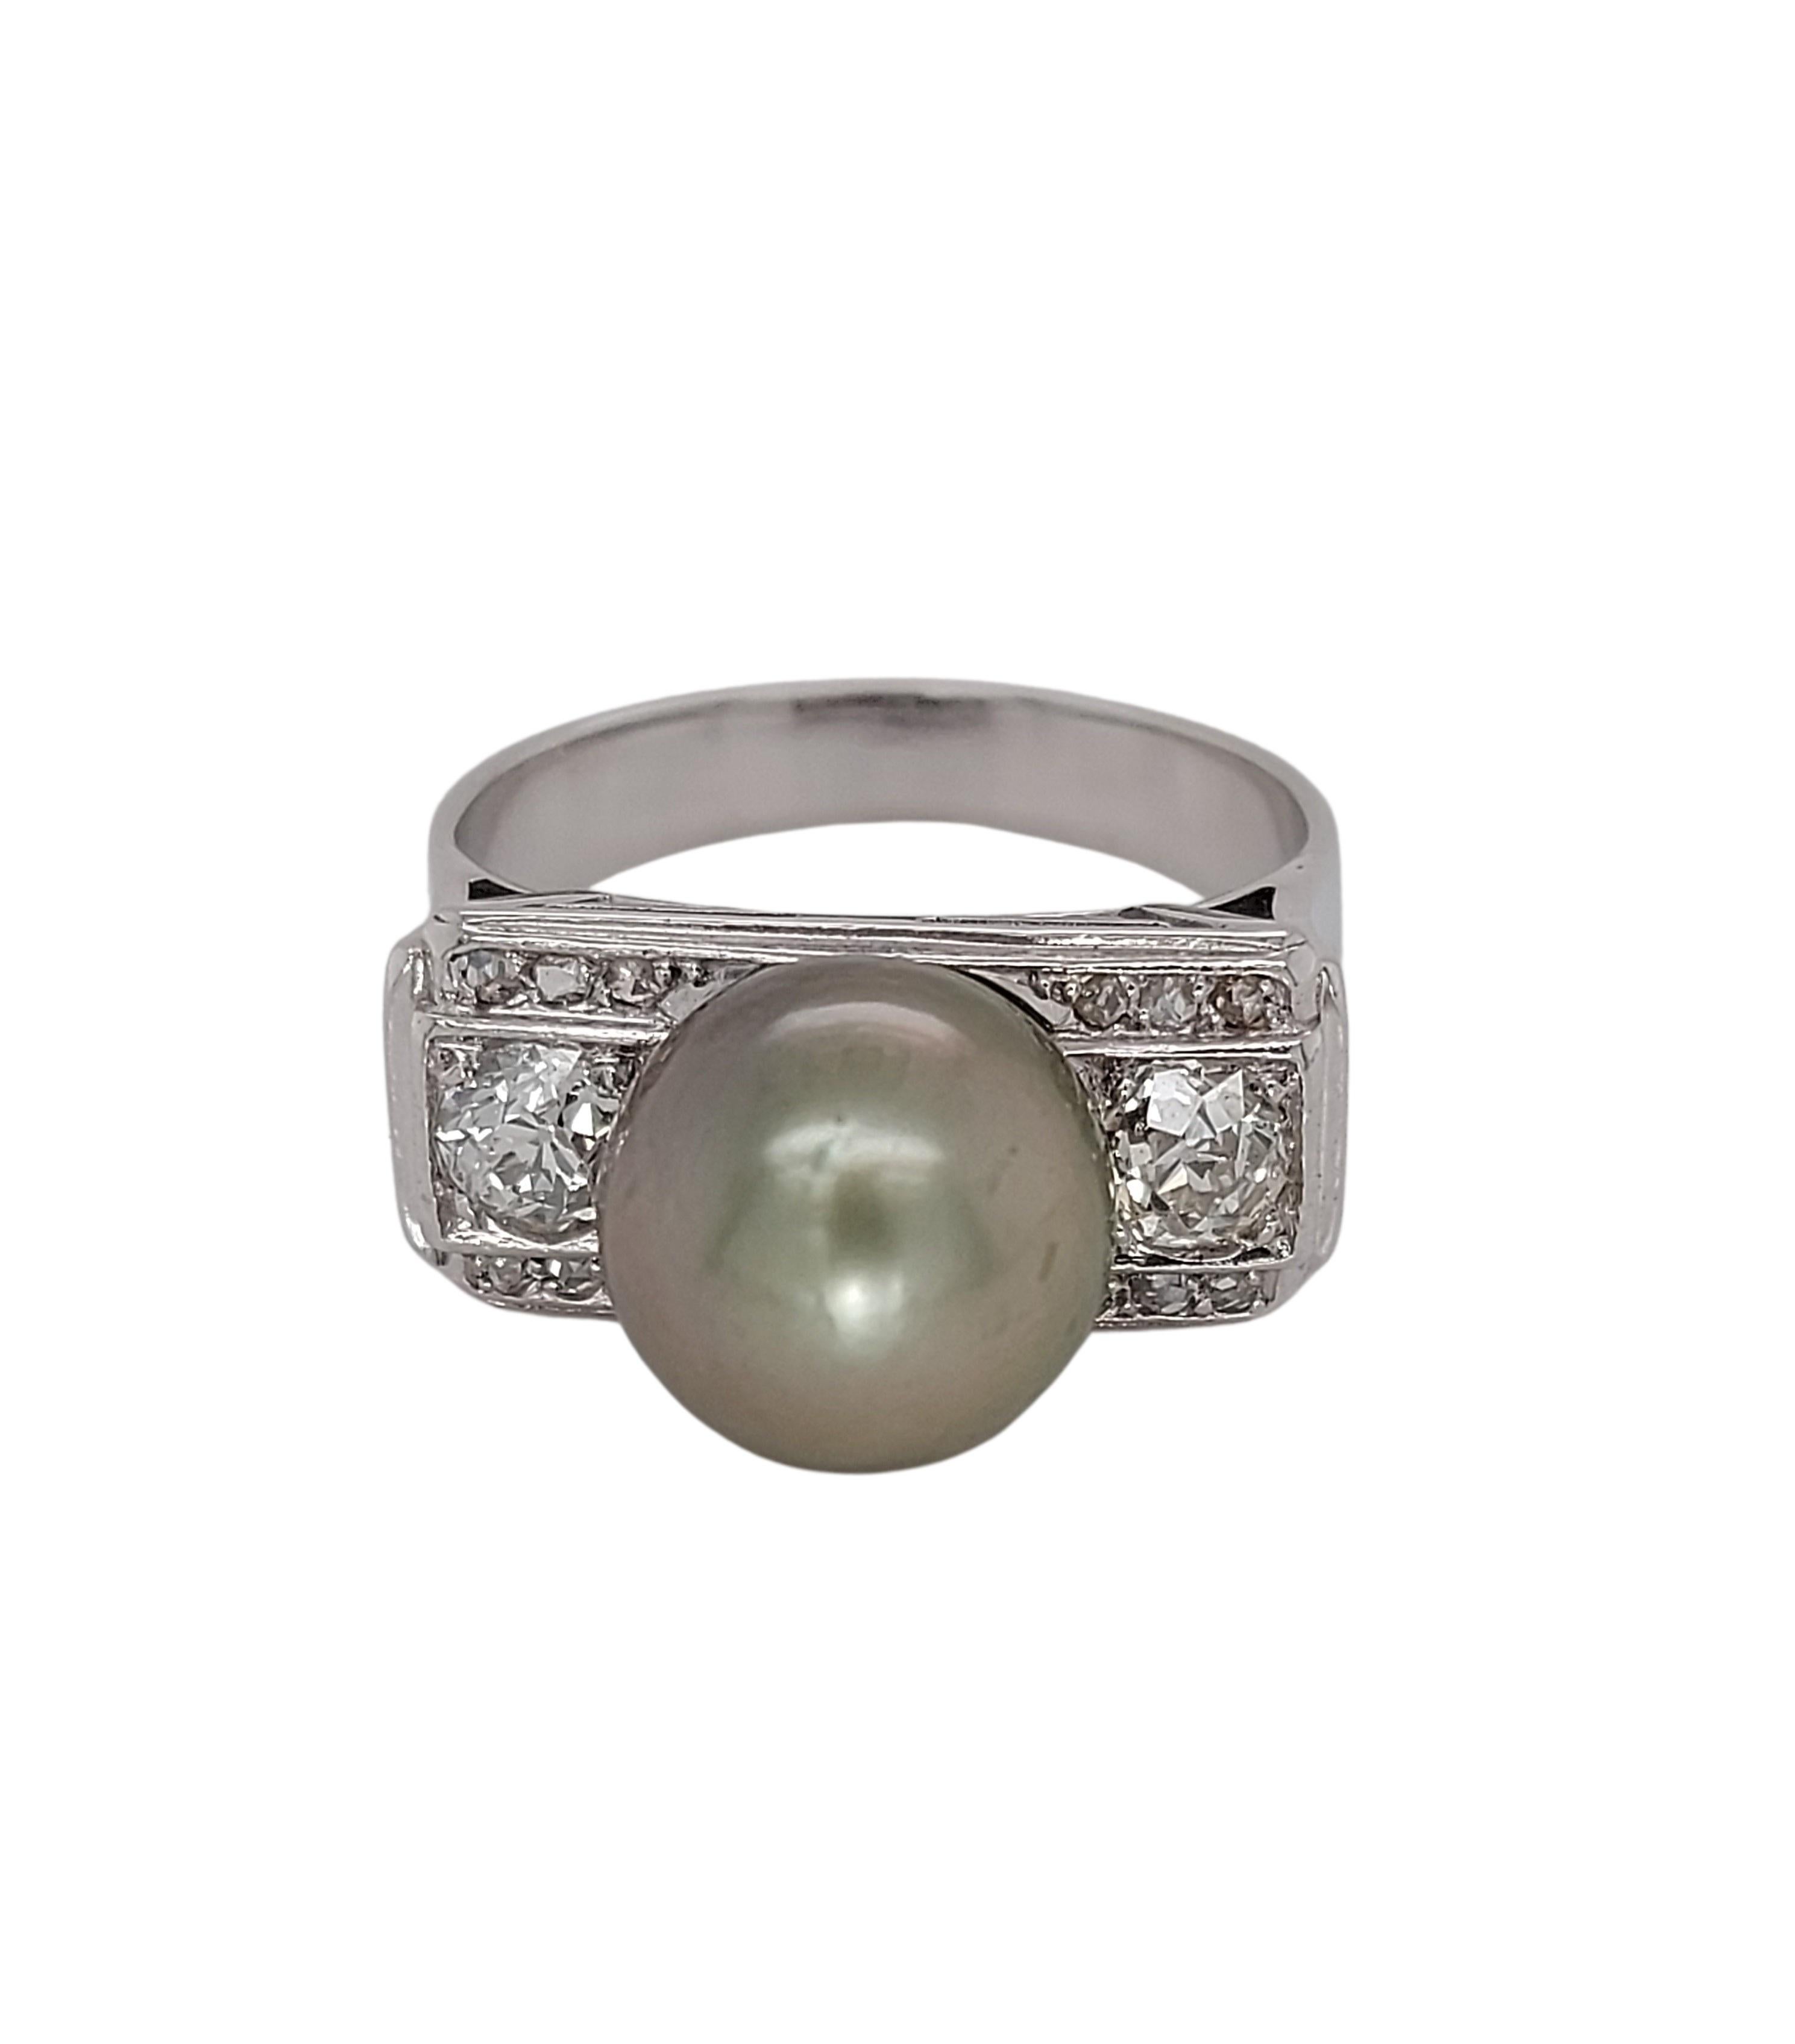 Artisan 18kt White Gold Ring with Green Tahiti Pearl and 0.5ct Old Mine Cut Diamonds